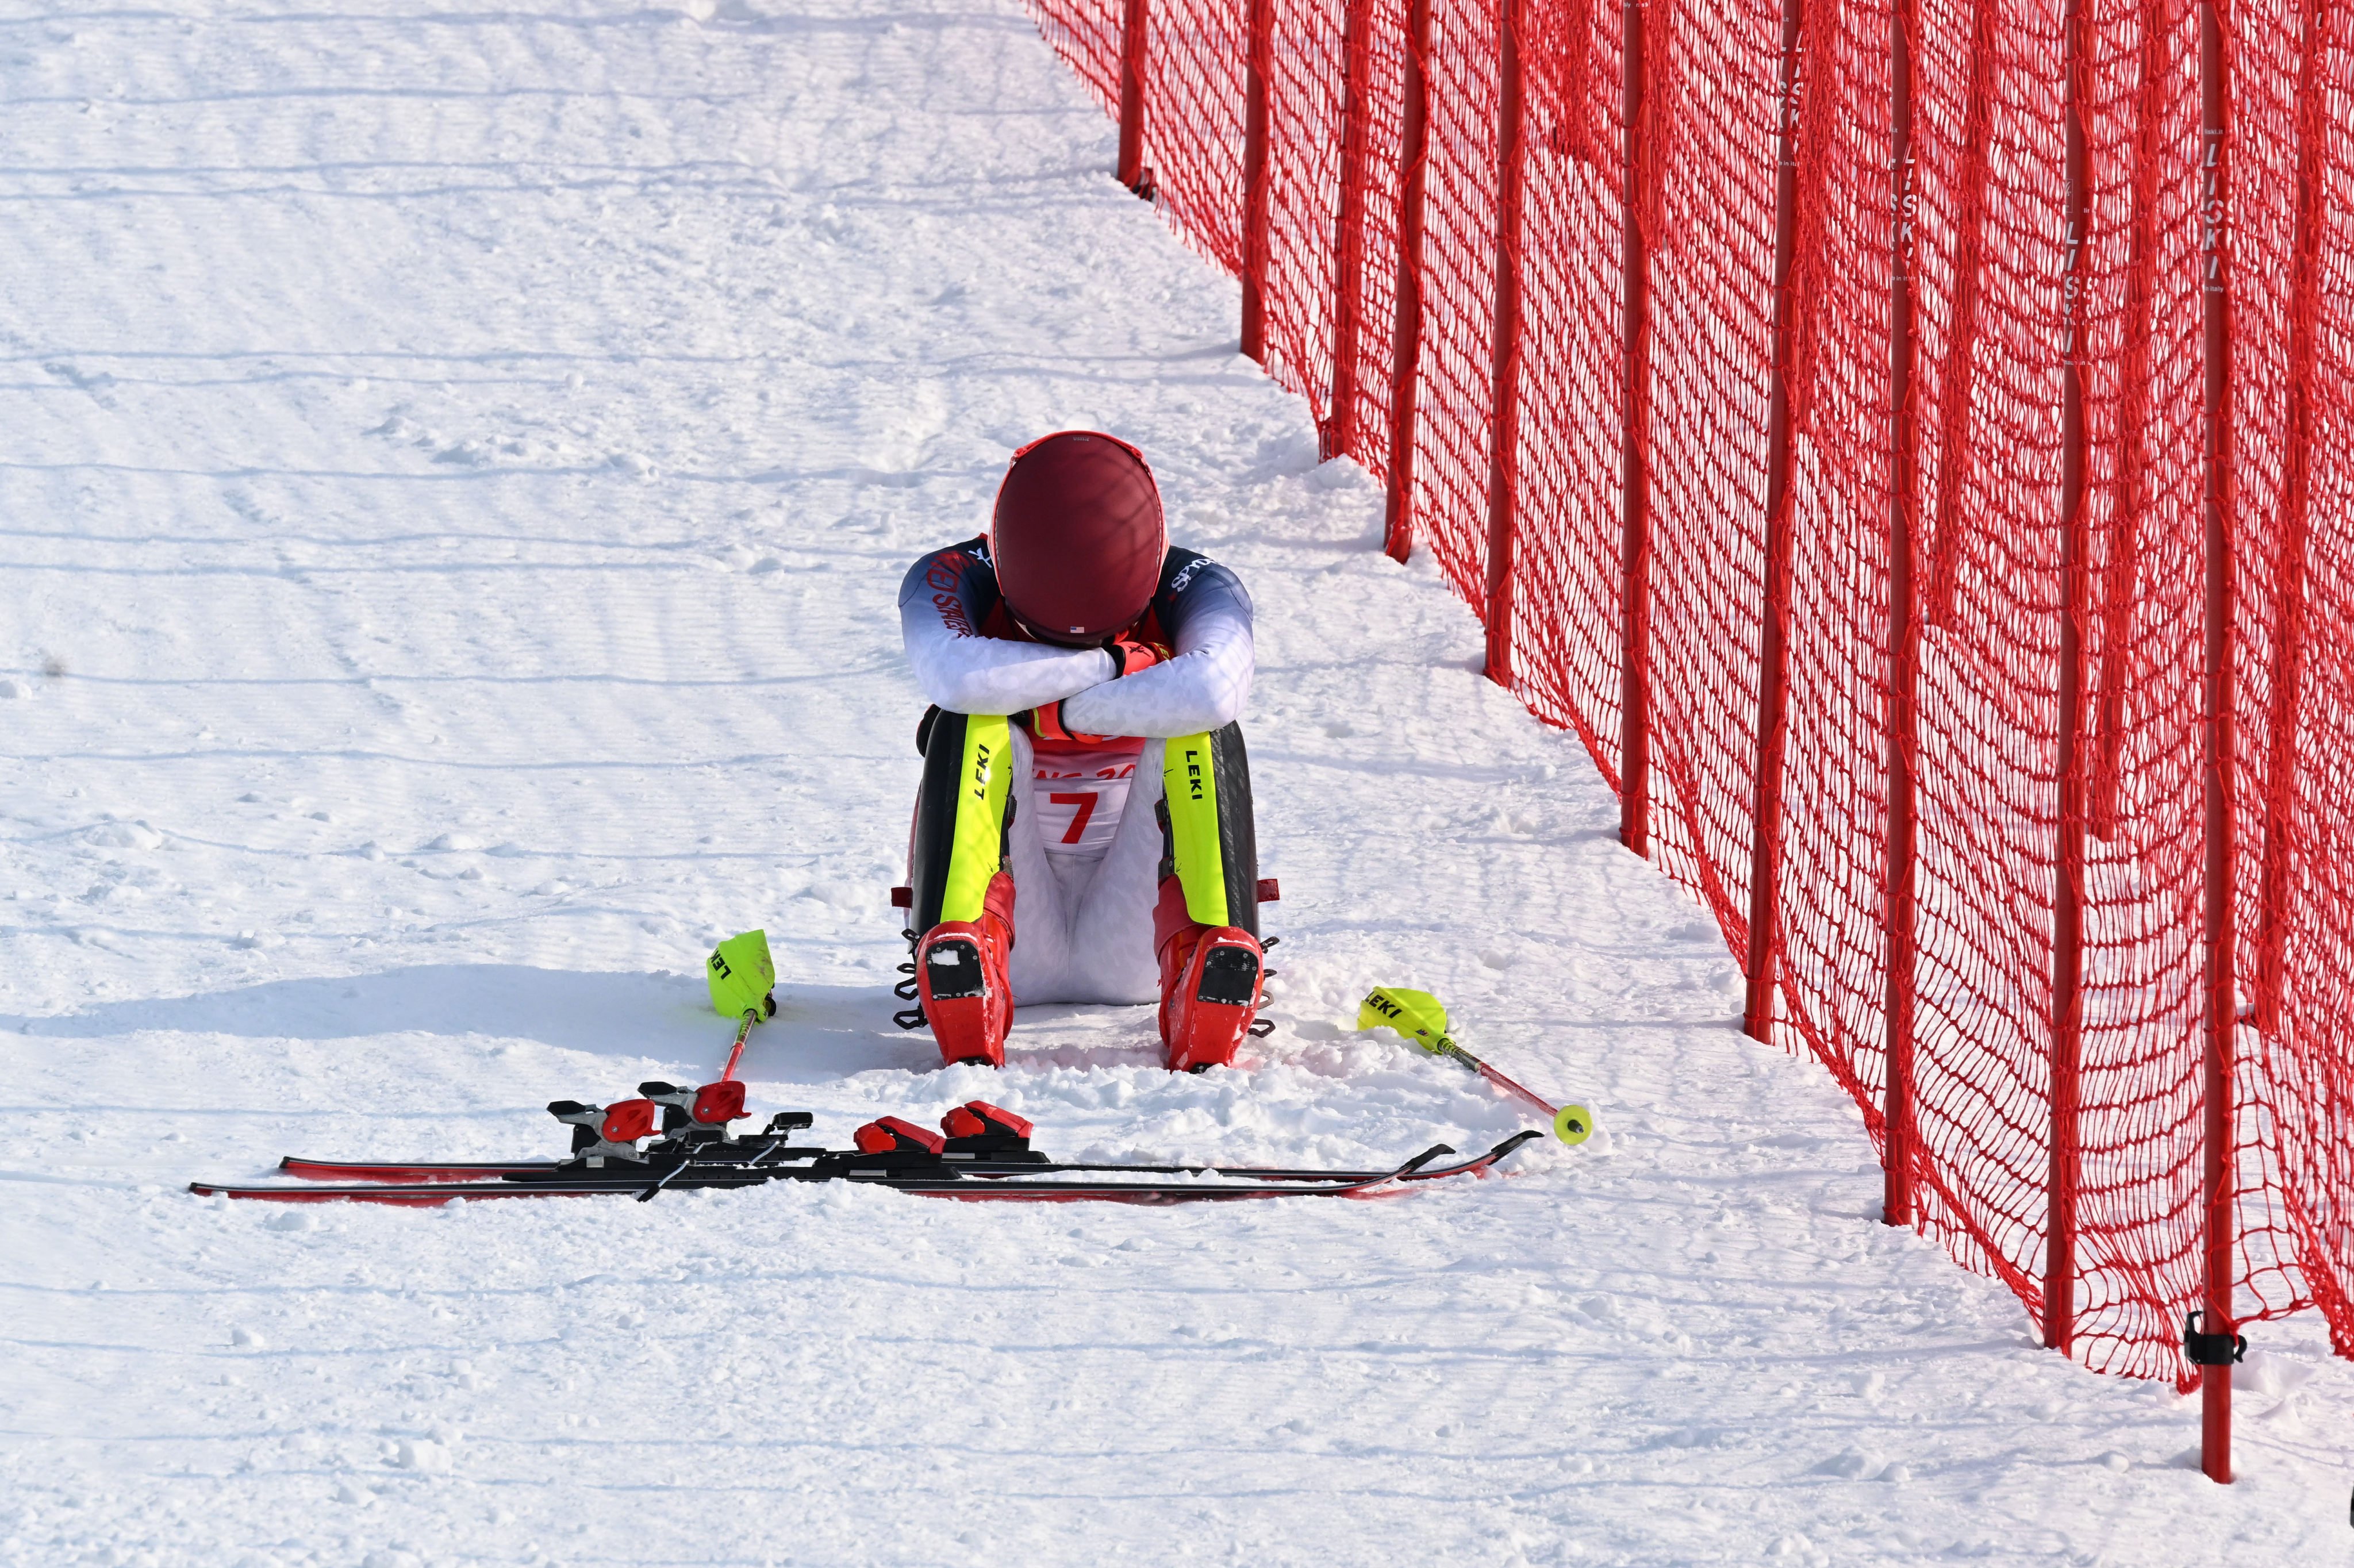 Mikaela Shiffrin sits disconsolately on the side of the course after failing to finish her slalom first run. Photo: Xinhua